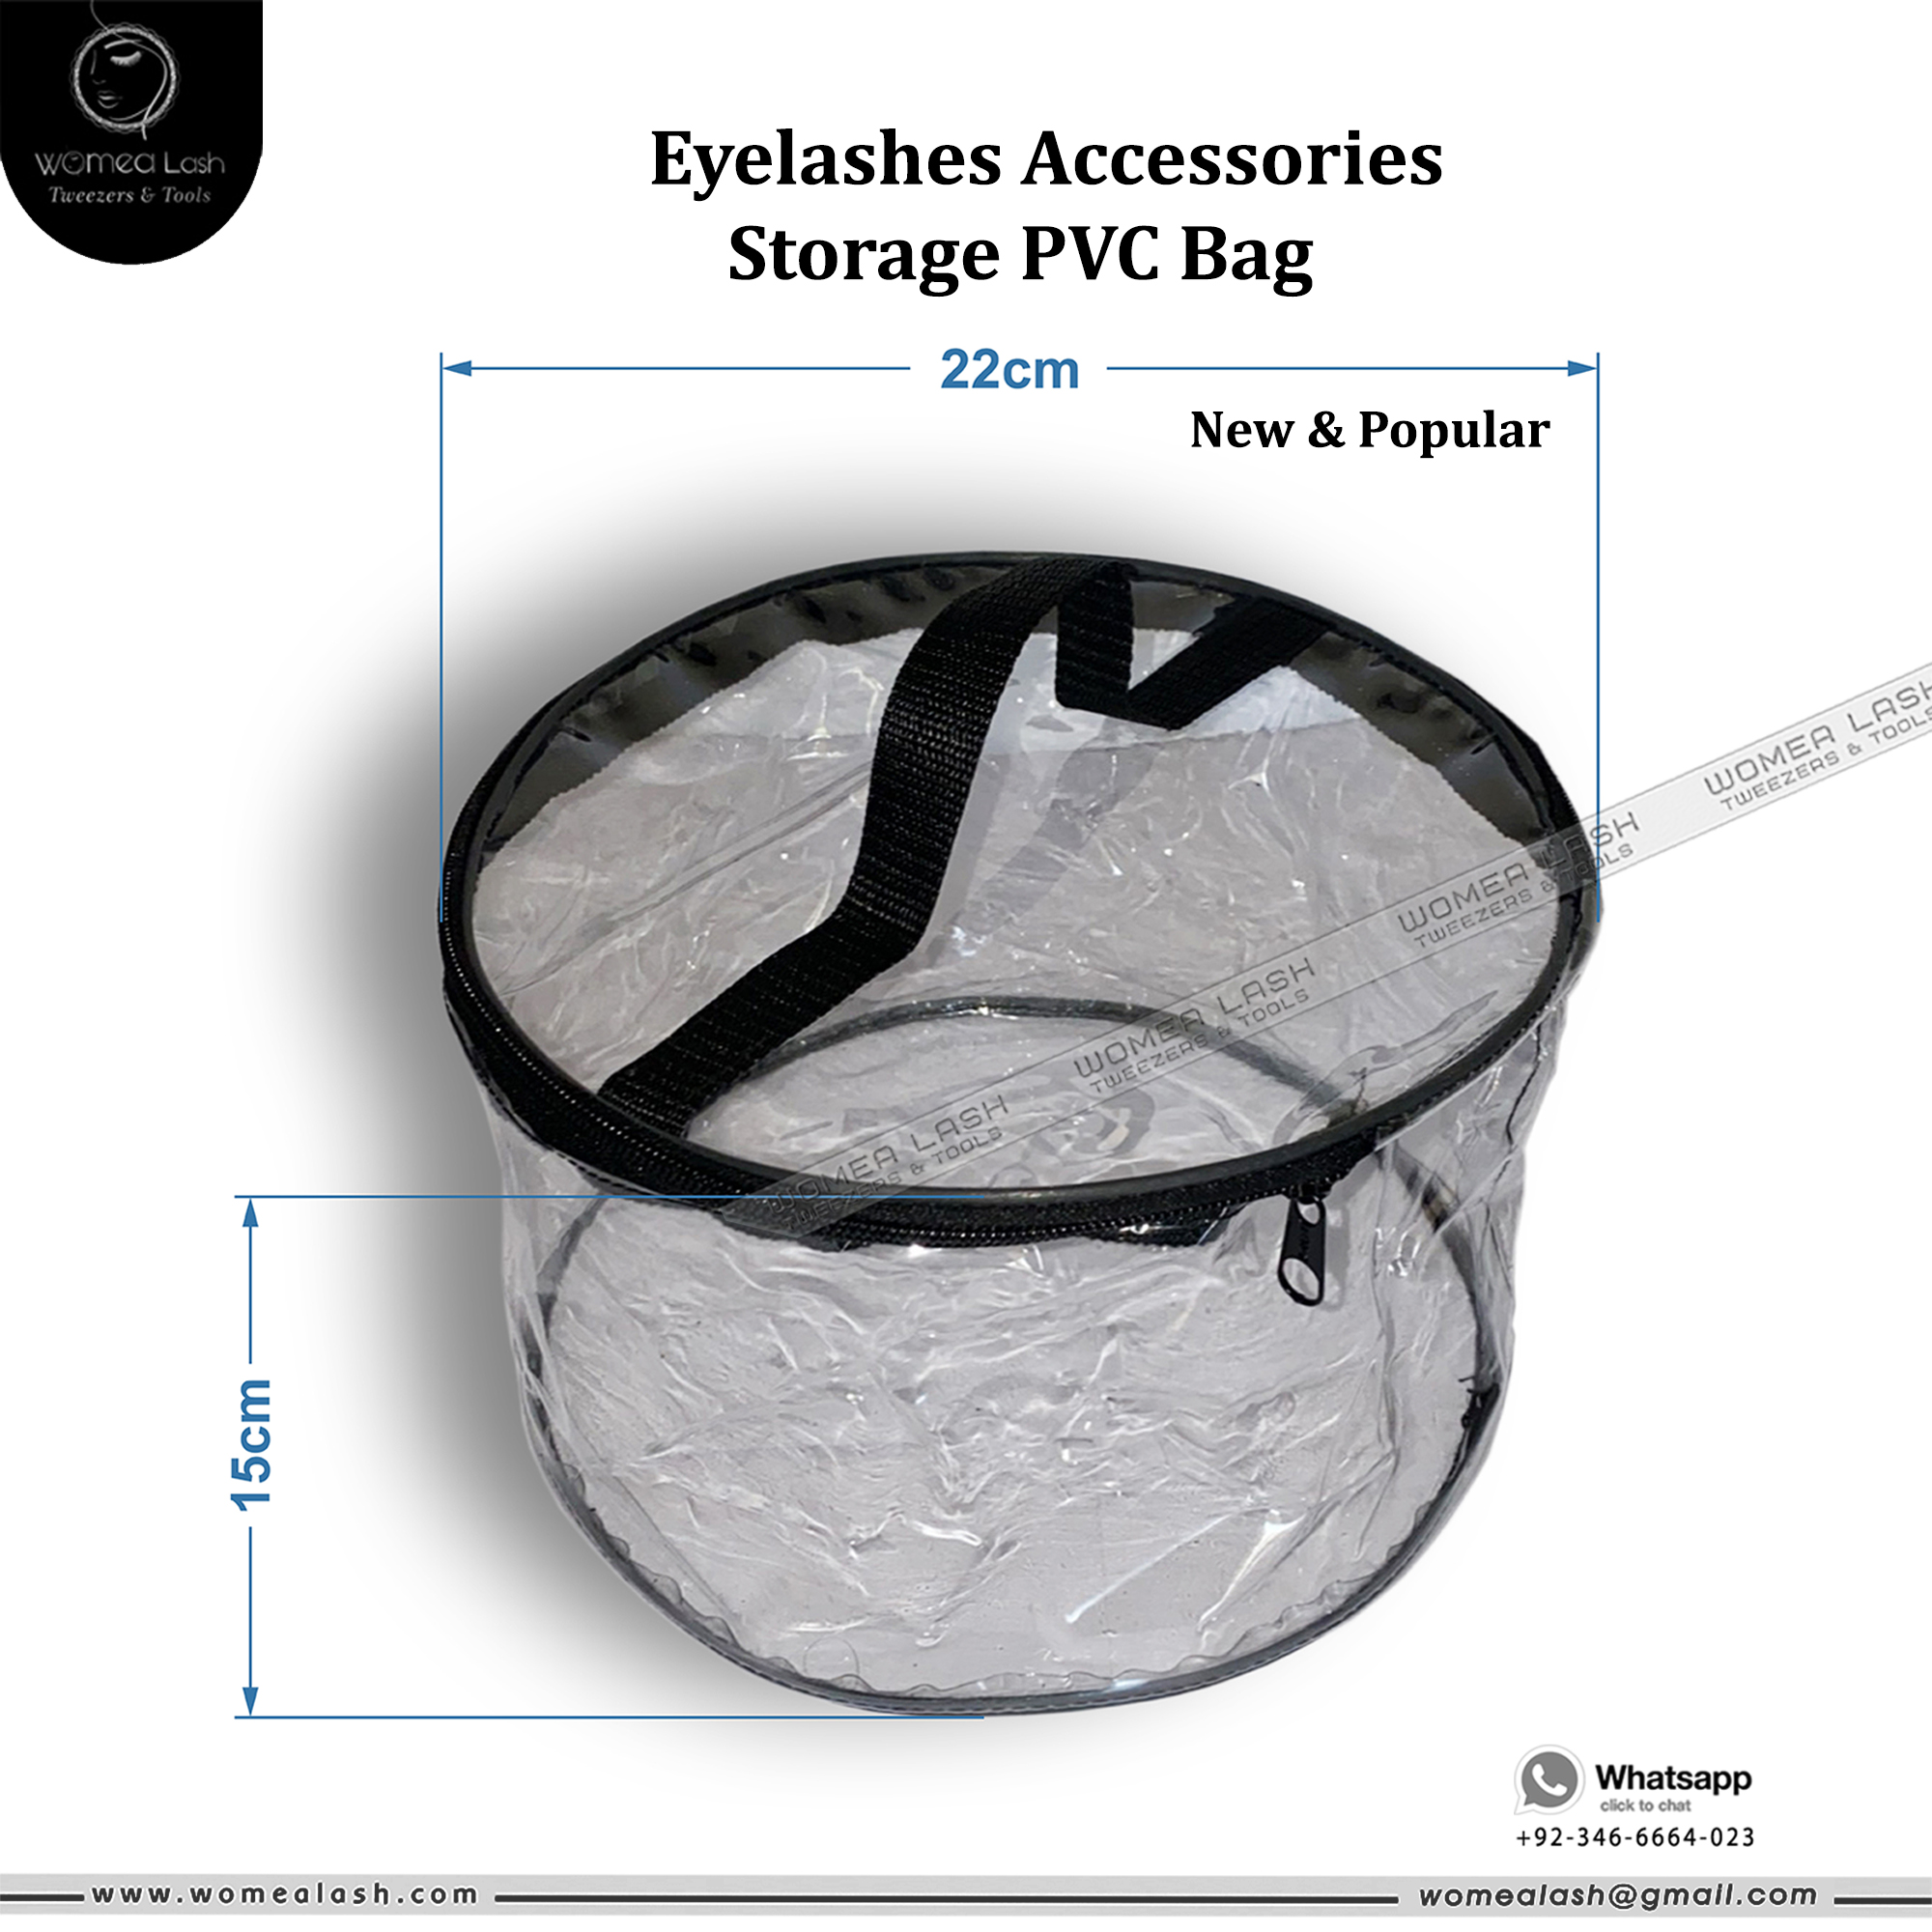 Eyelashes Accessories Storage PVC Bag By Womea Lash This Customized PVC Bag made for Eyelashes Accessories Storage.